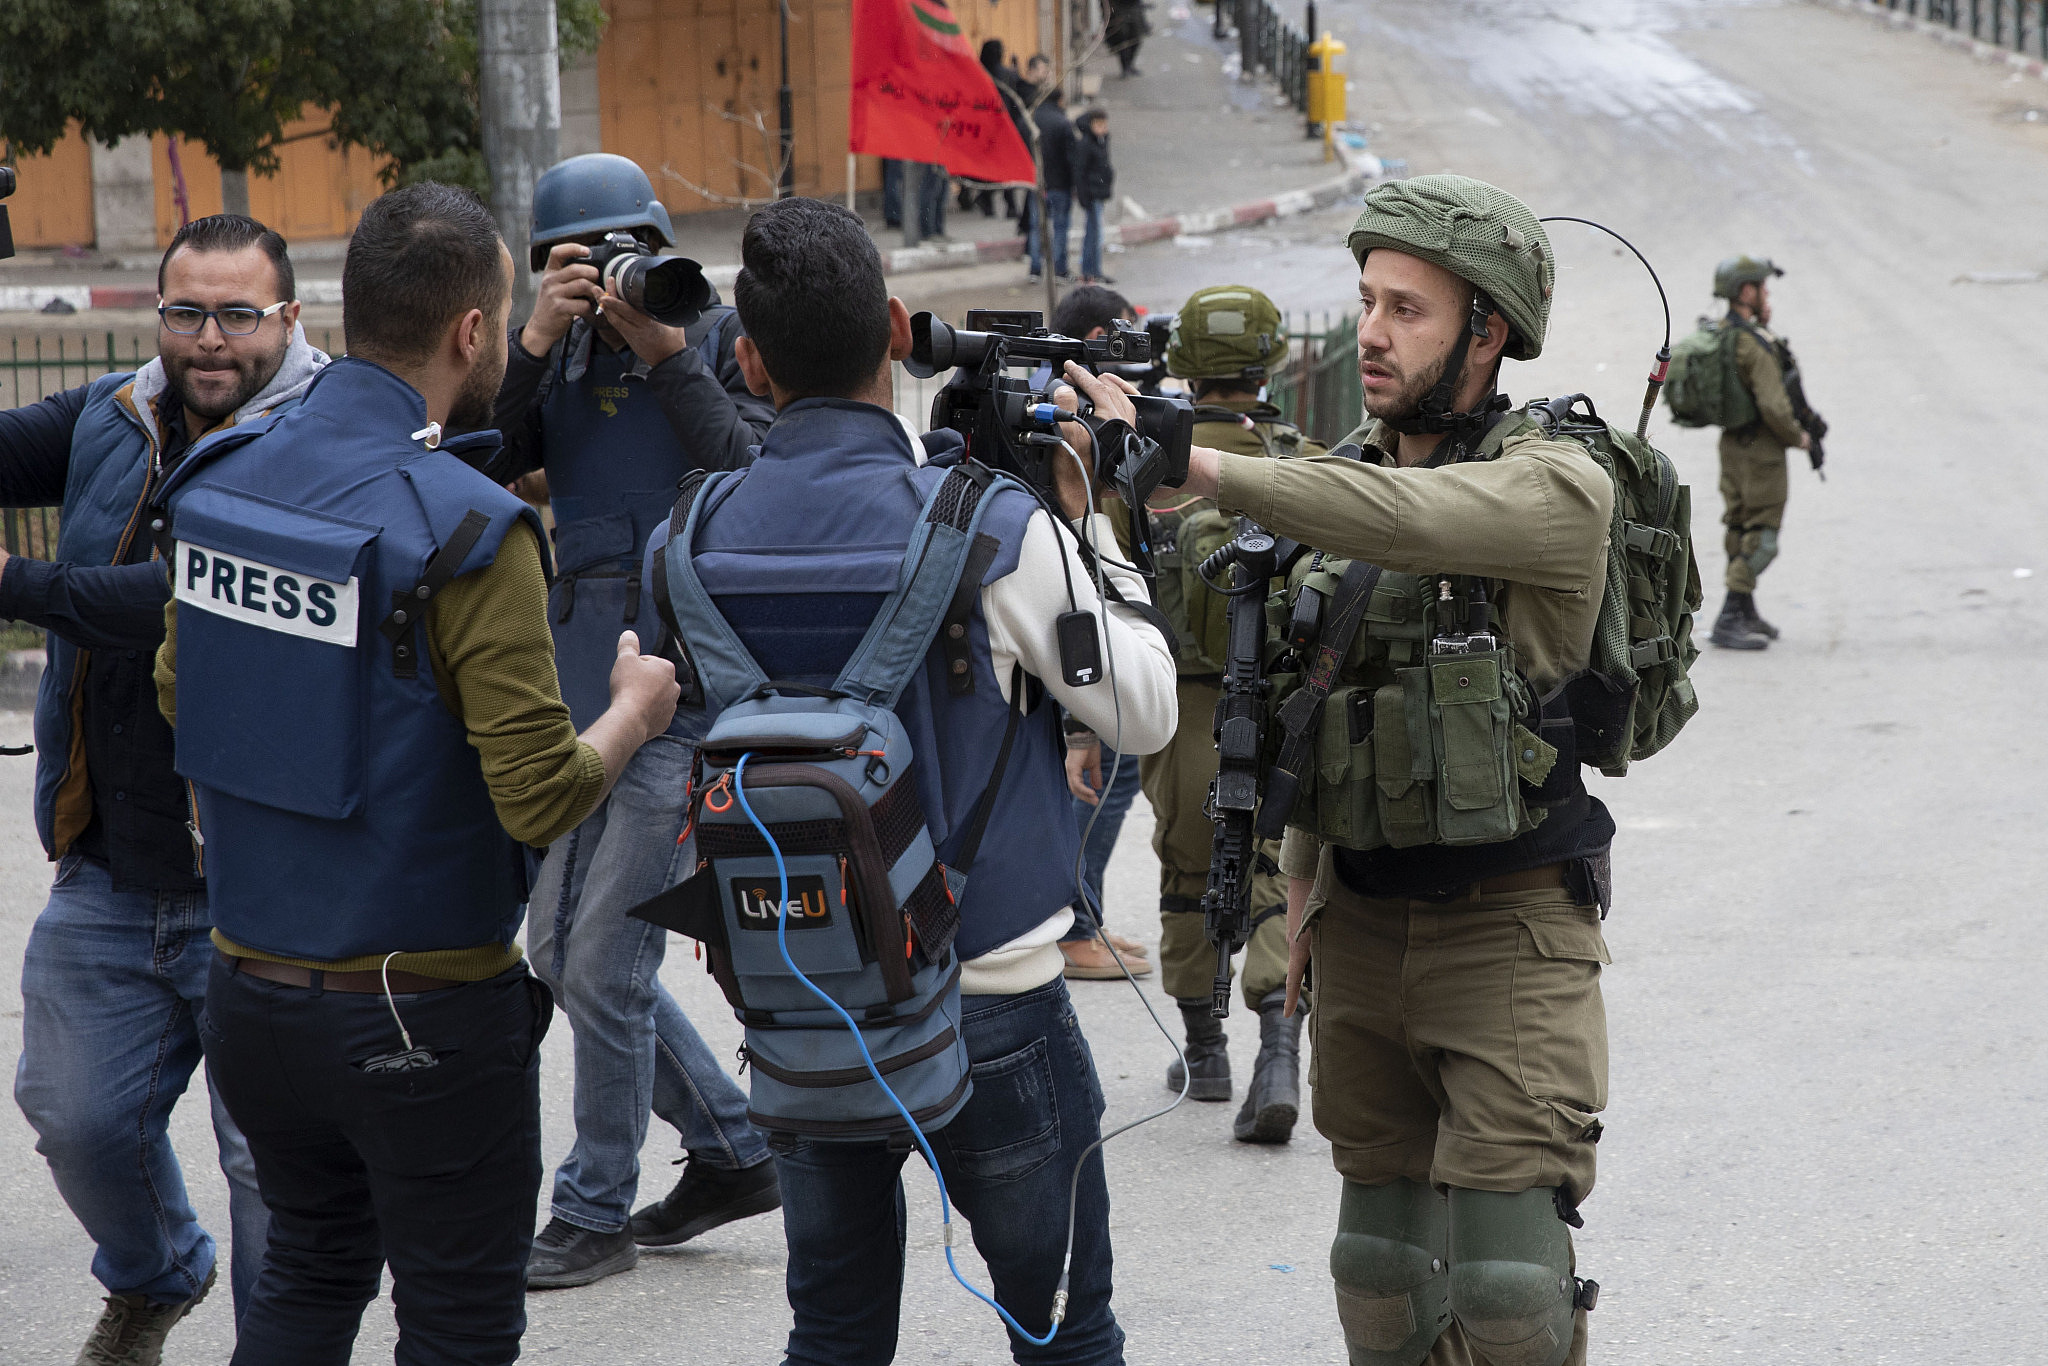 Israeli soldiers confront journalists as Palestinian, Israeli, and international demonstrators march in the West Bank city of Hebron calling to open the Shuhada Street, February 20, 2019. (Oren Ziv/Activestills)